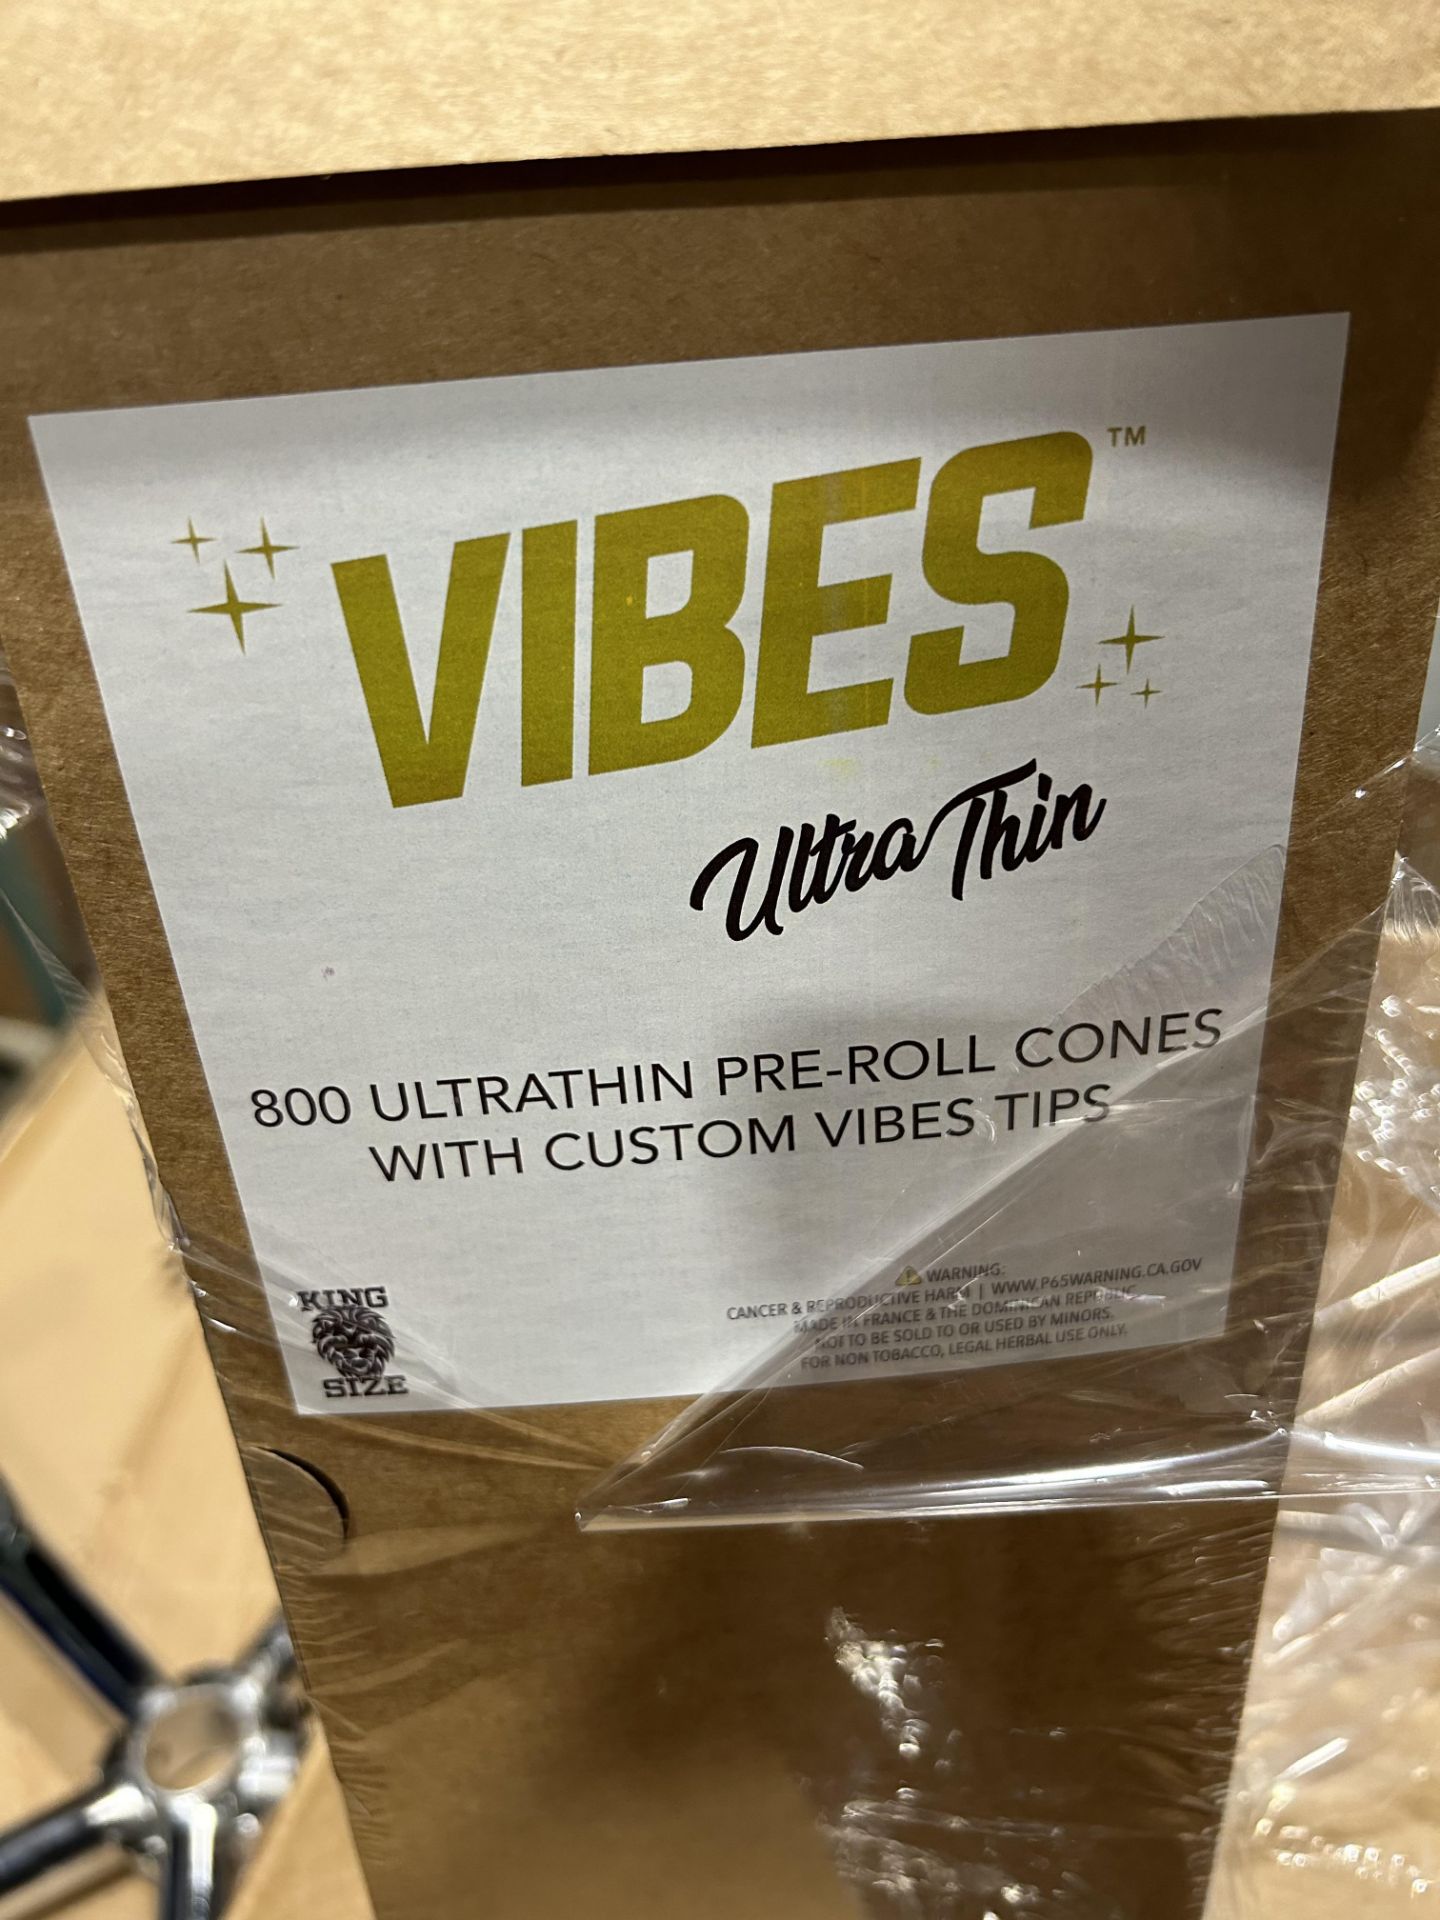 Lot of (76K Units) of Vibes Ultra Thin King Cones & (62.4k Units) of Futurola King Size Blunt Cones